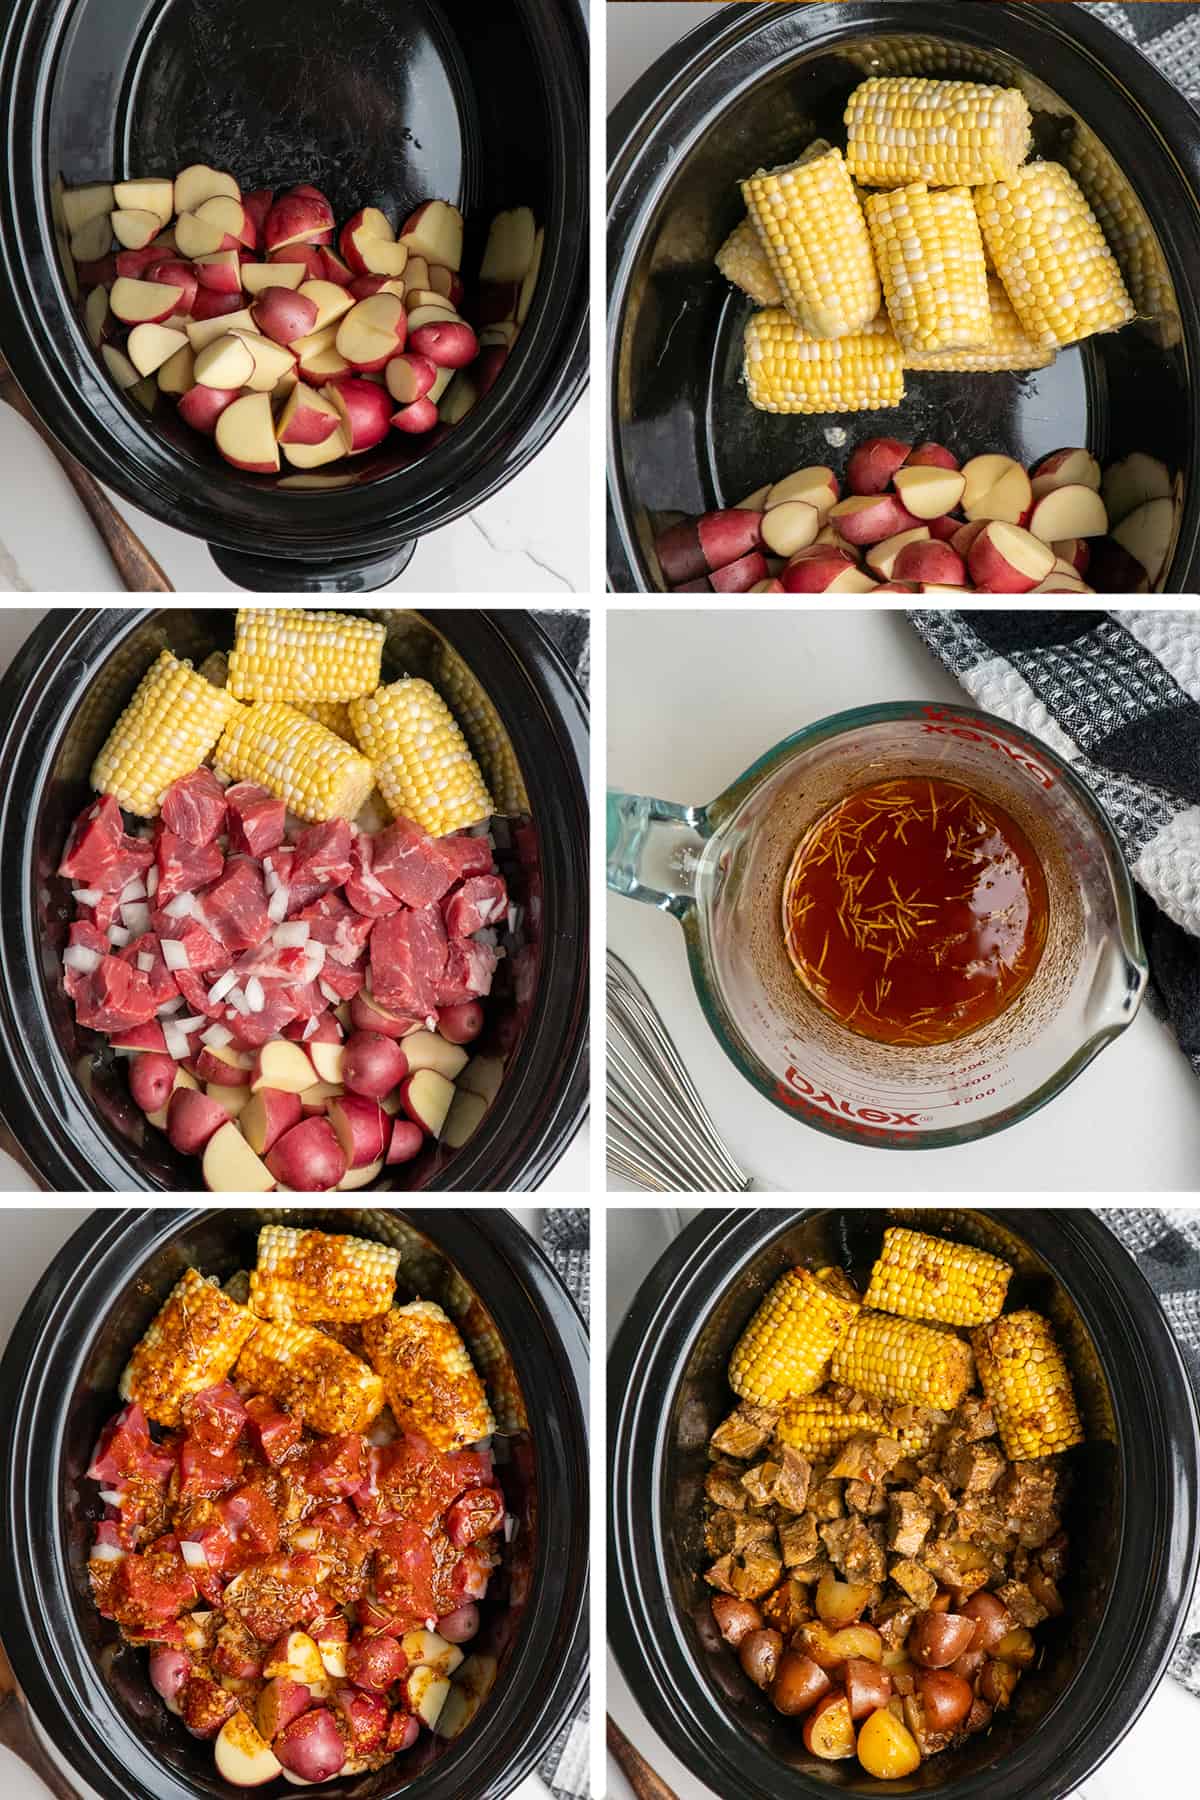 6 Images showing how to make steak potatoes and corn with garlic butter in a slow cooker.